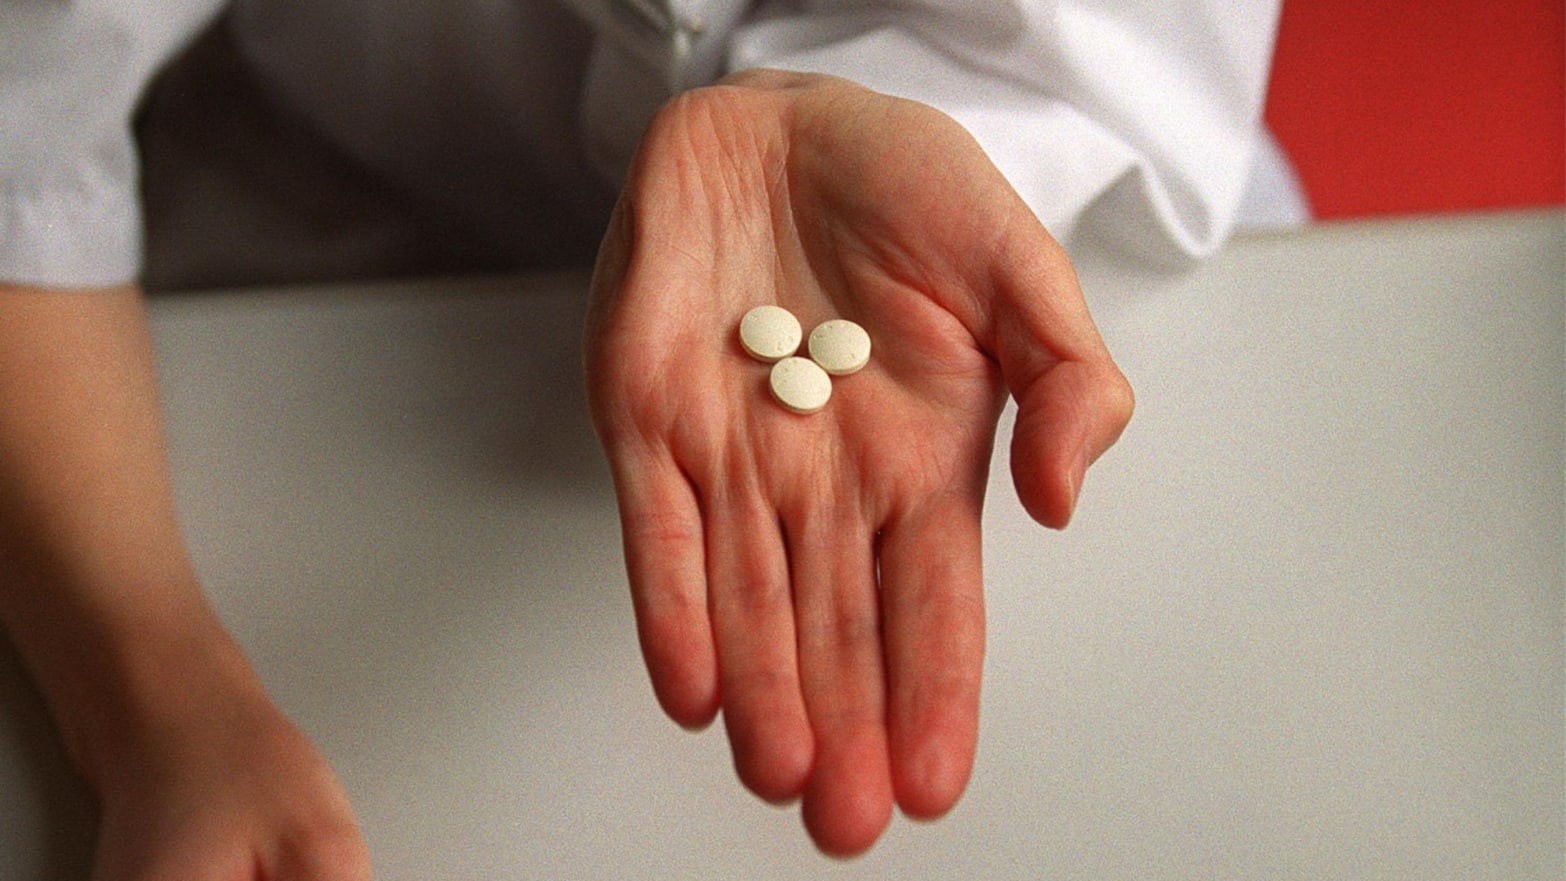 Aid Access Sues FDA to Prescribe Mail-Order Abortion Pills